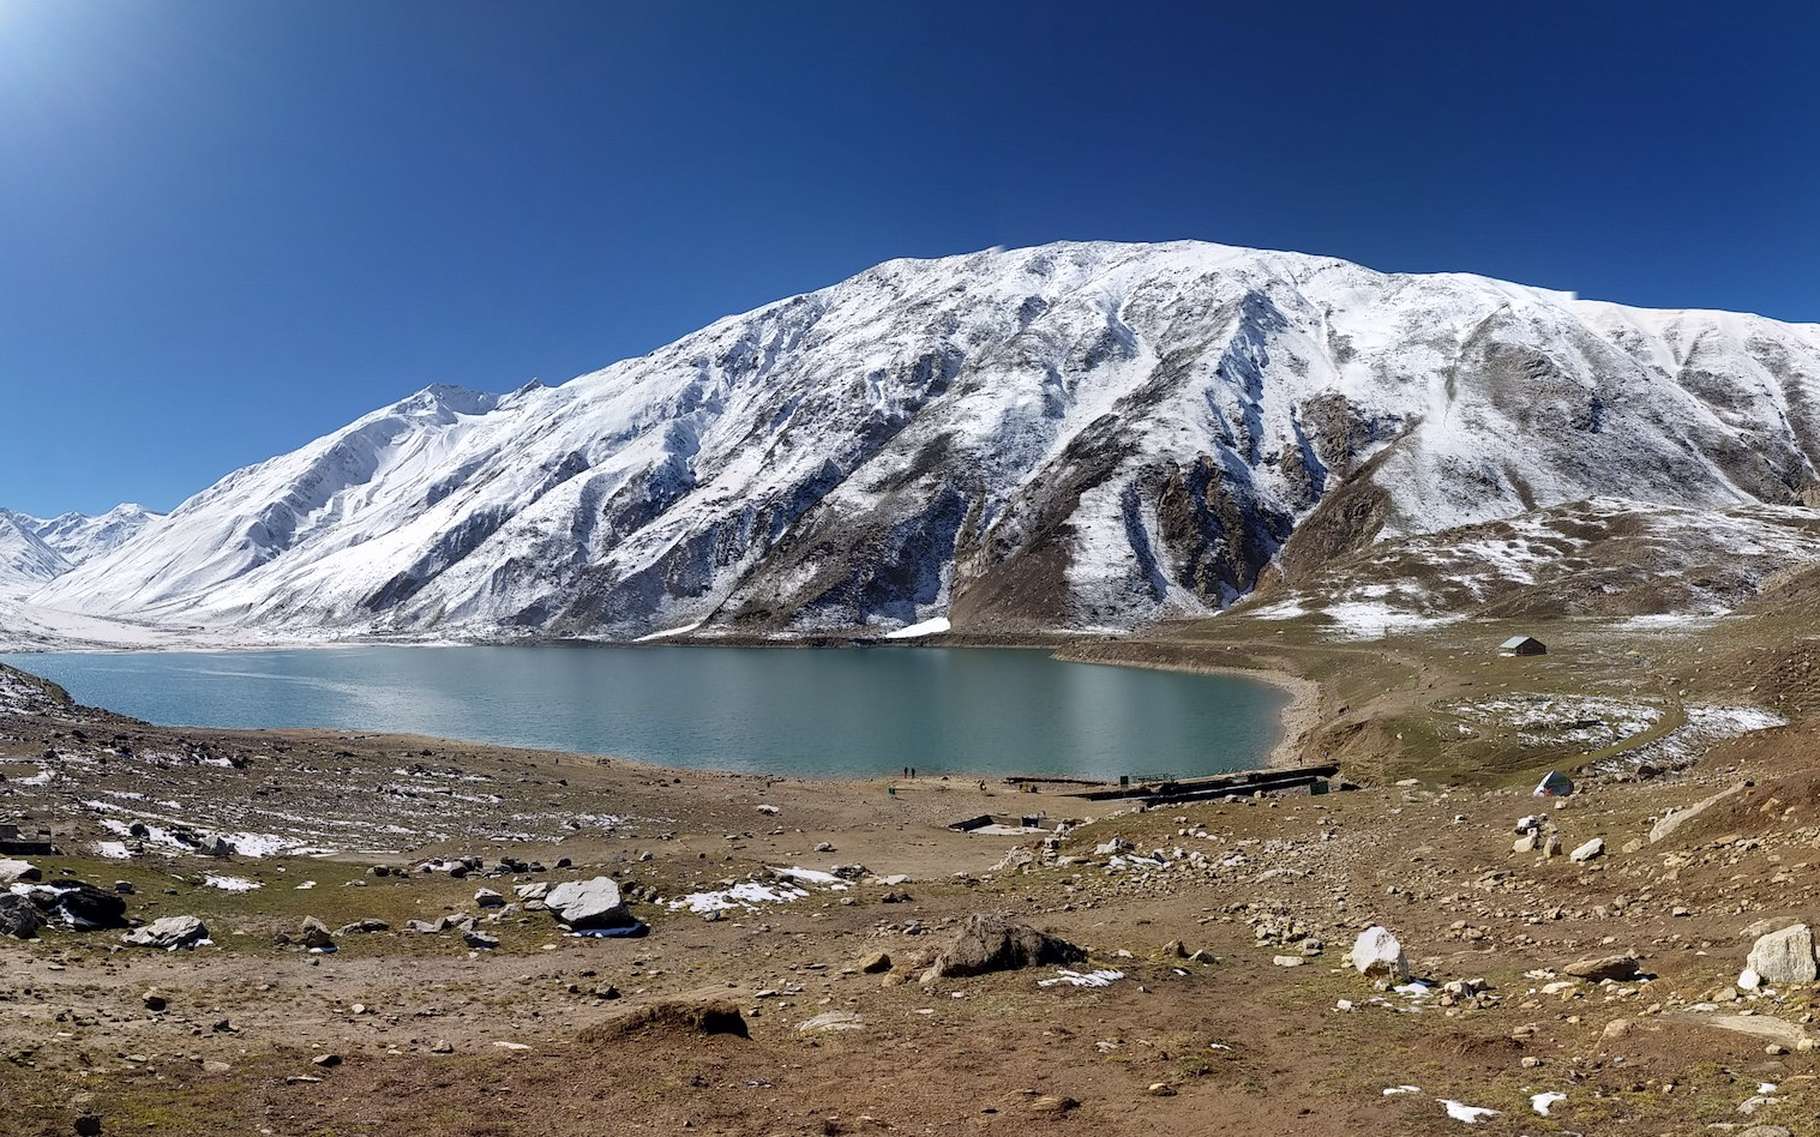 India: High temperatures cause rupture of glacial lakes in Himalayas